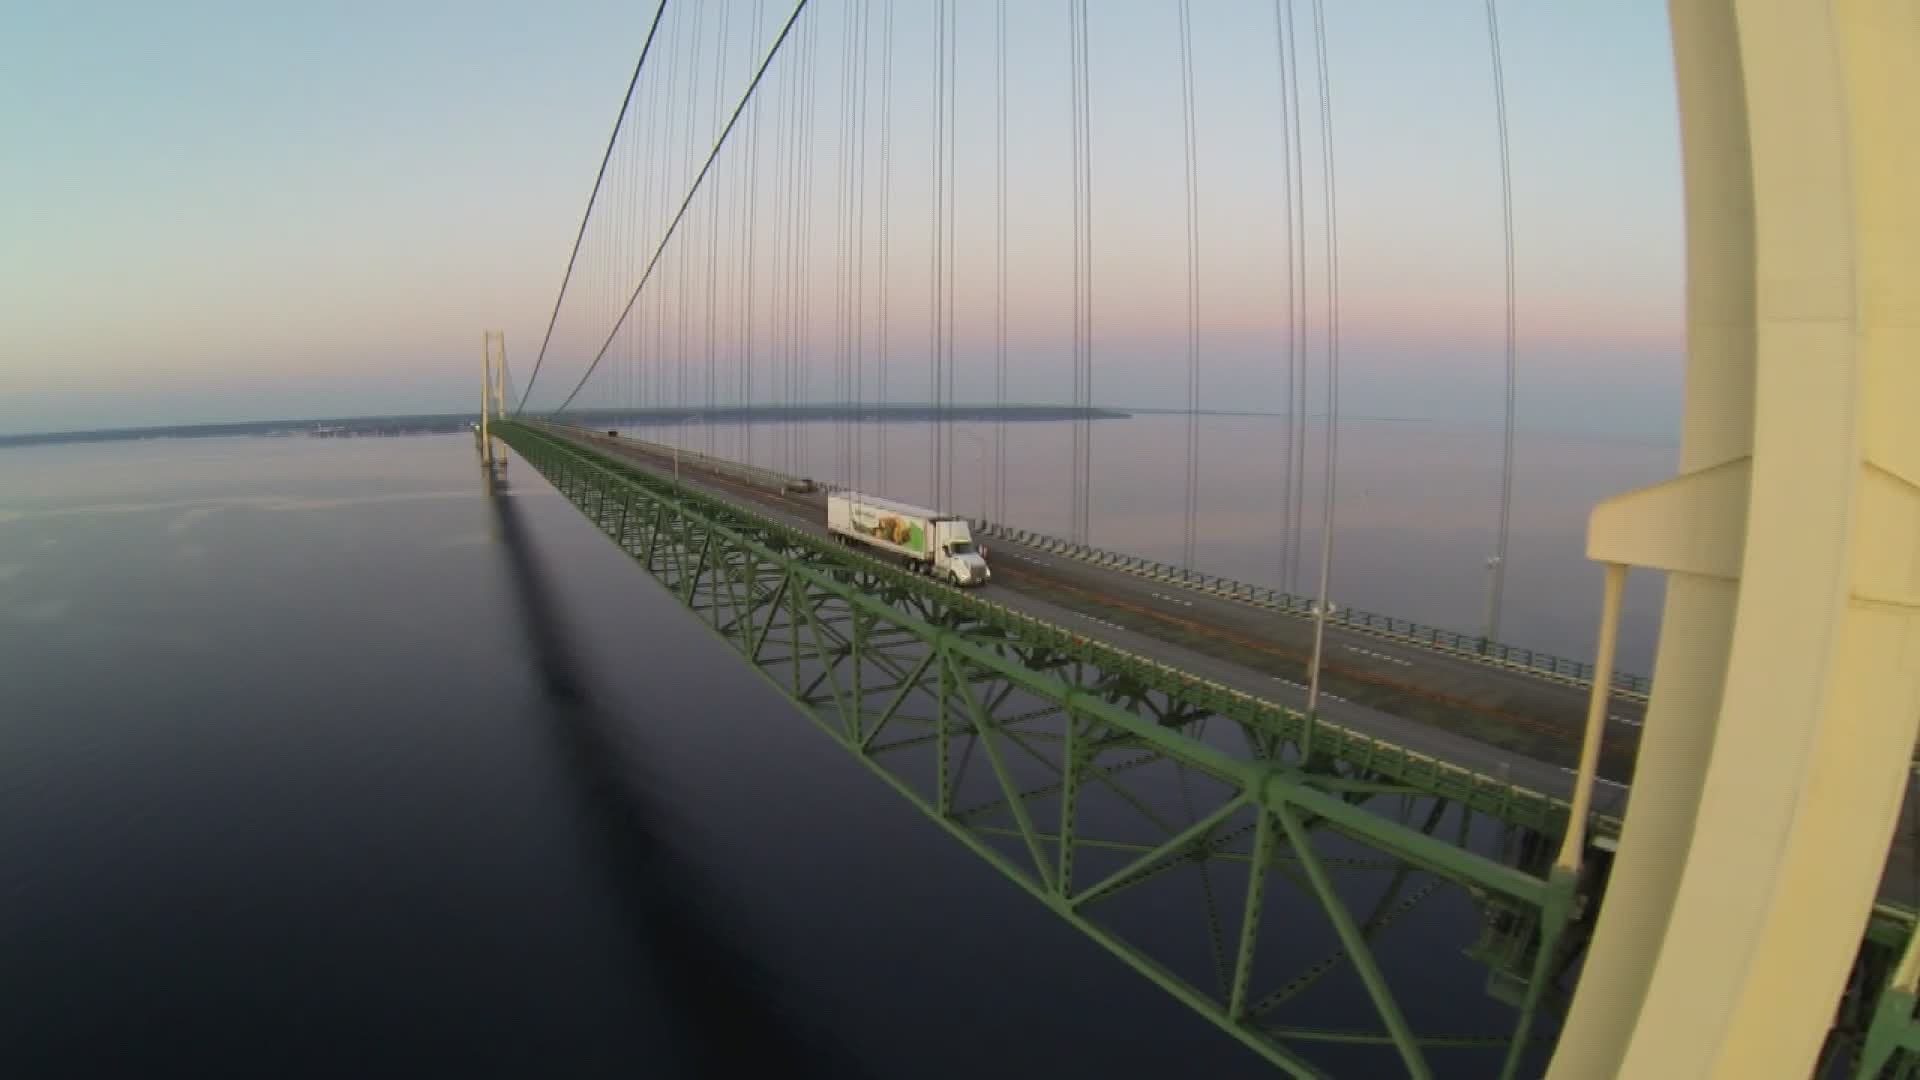 Son uses drone to record one of his bridge-loving dad's final runs, in a 41-year truck driving career that's covered over 3 million miles.